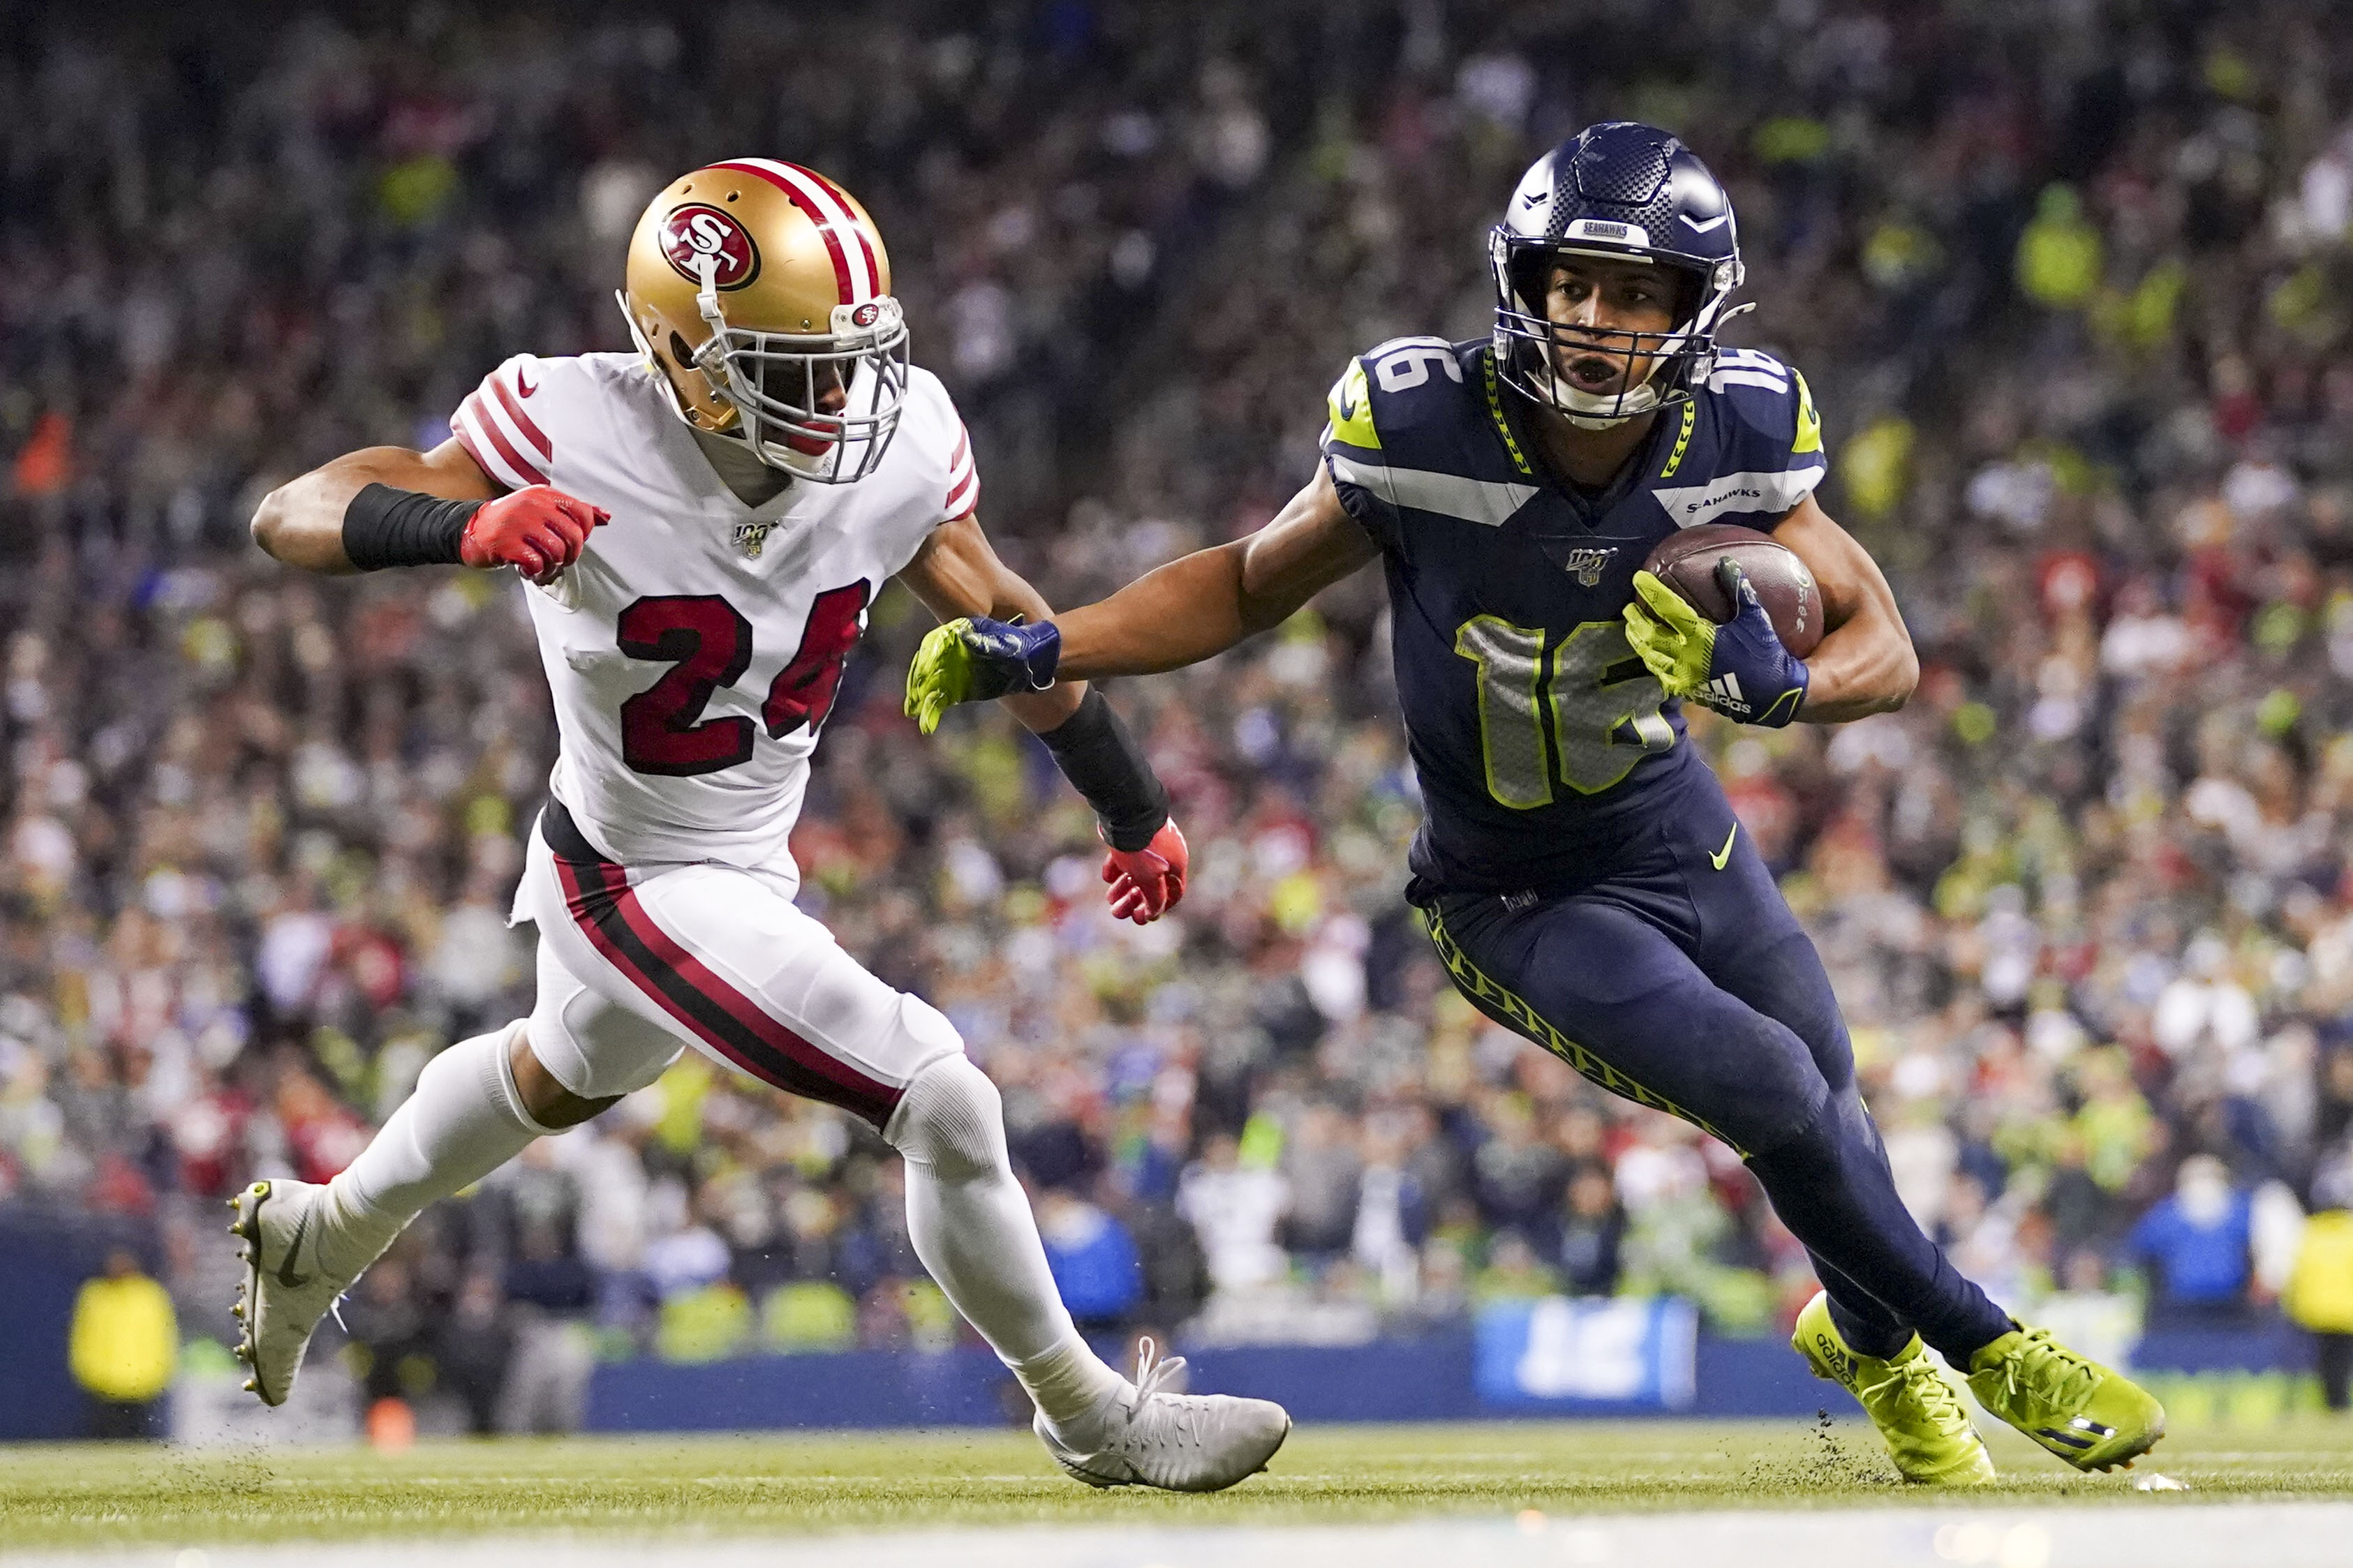 Seattle Seahawks wide receiver Tyler Lockett (16) is tackled by San Francisco 49ers defensive back K'Waun Williams (24) during the fourth quarter at CenturyLink Field.